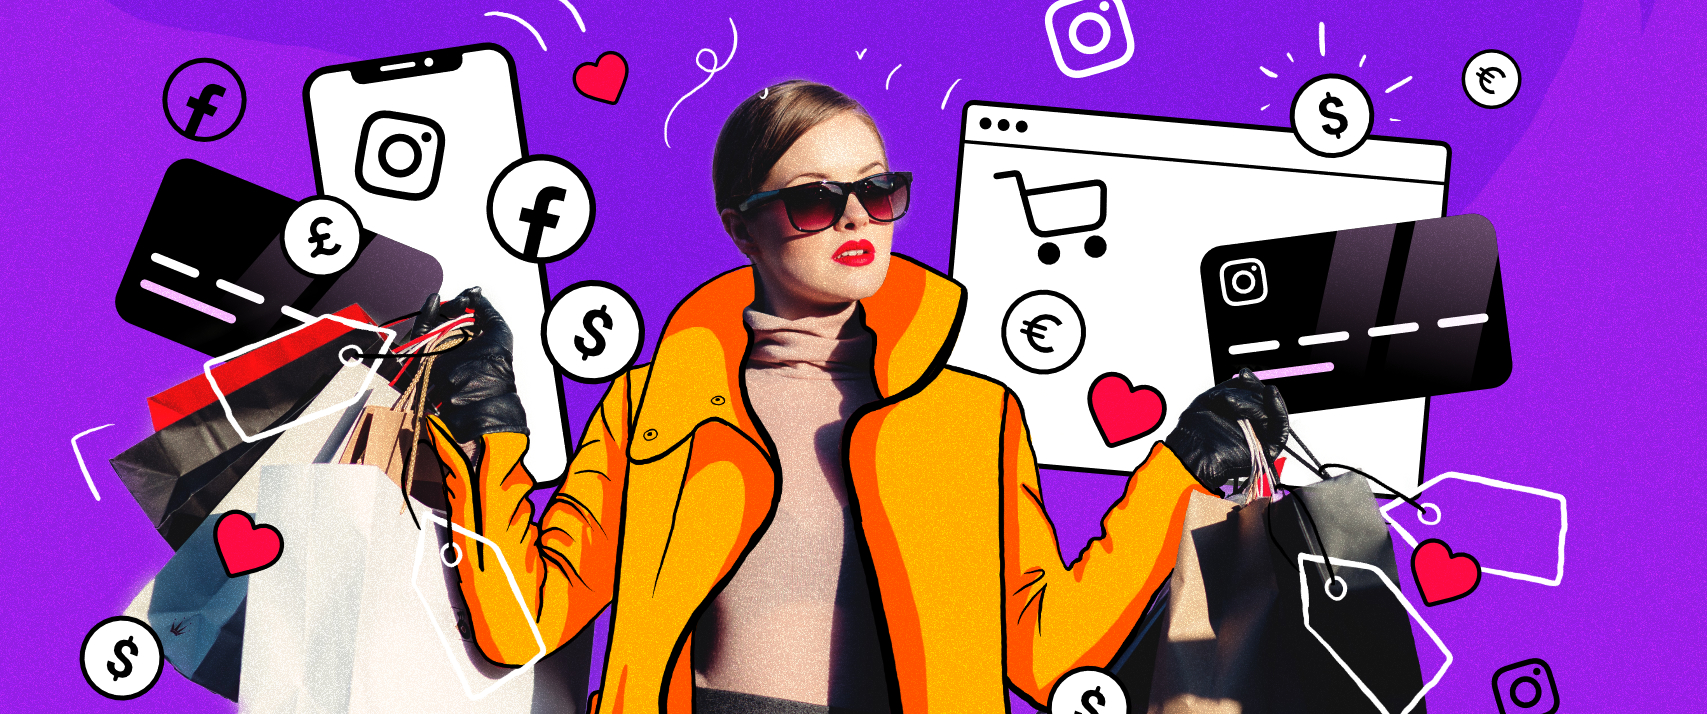 Influencers driving e-commerce in 2020